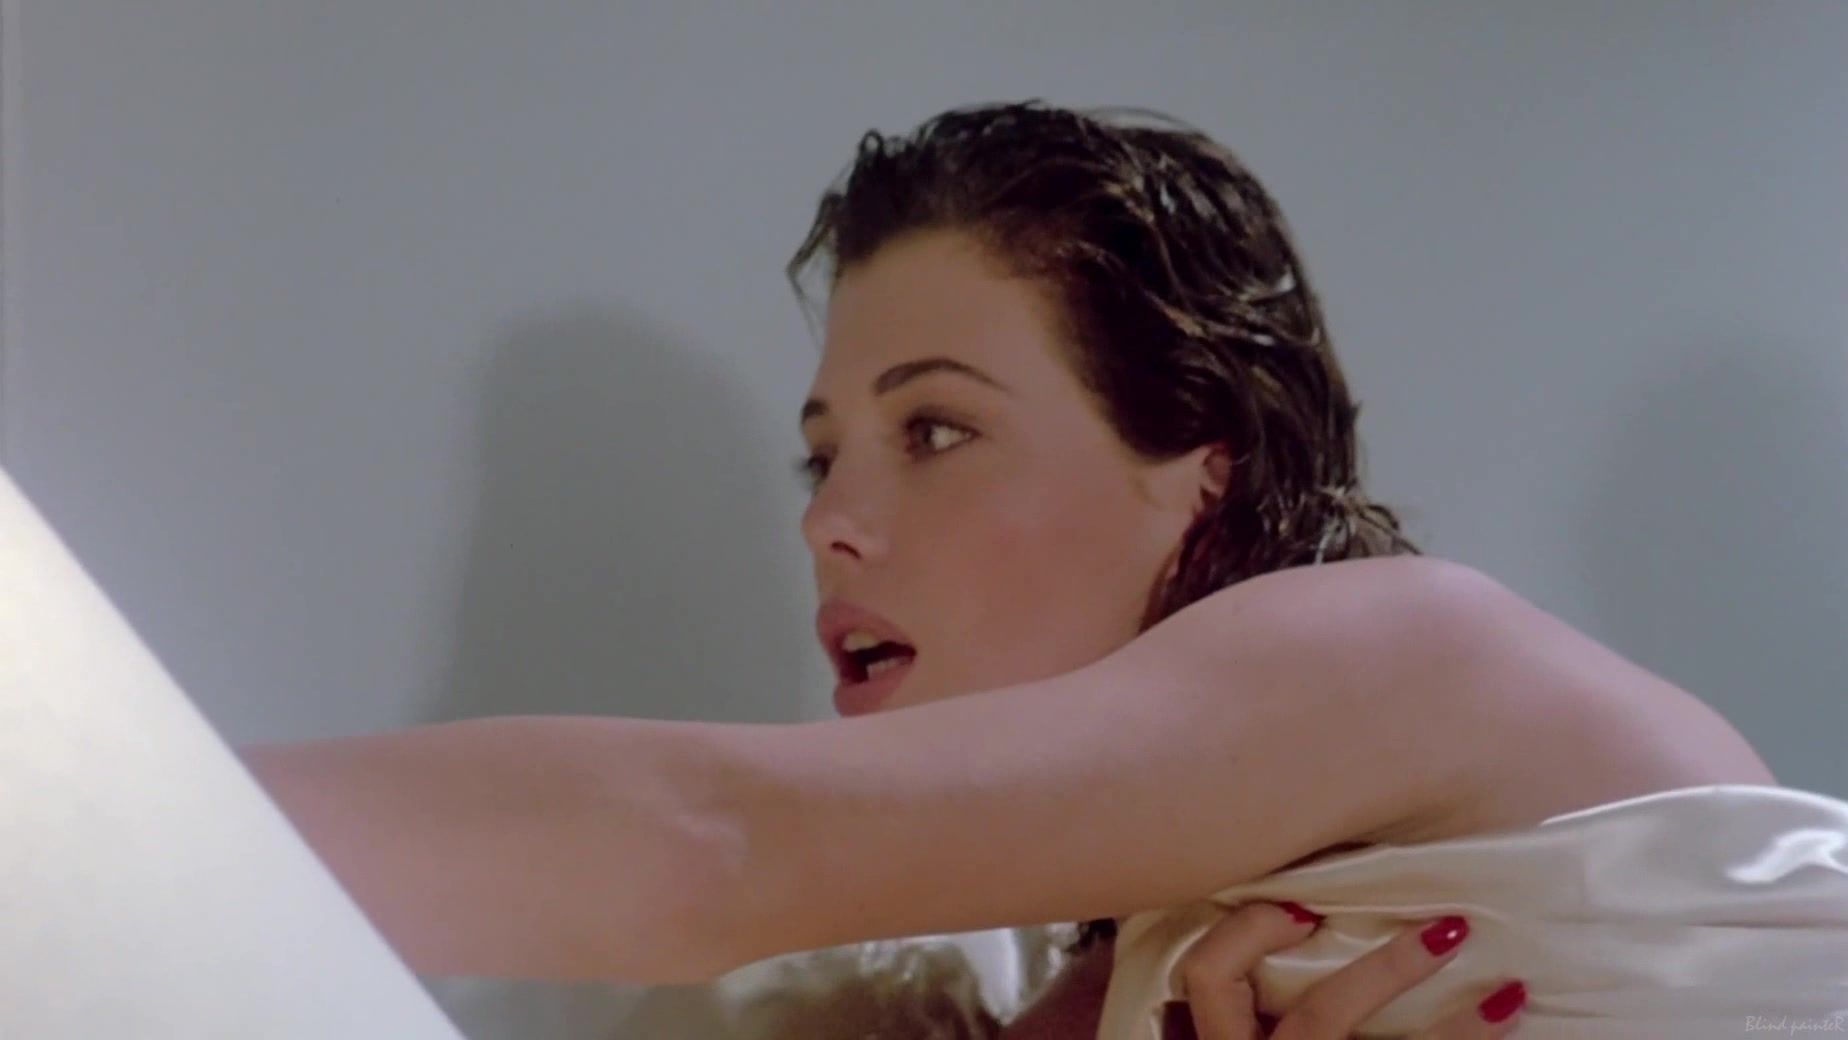 PornGur Kelly LeBrock nude - The Woman in Red (1984) 18Lesbianz - 1